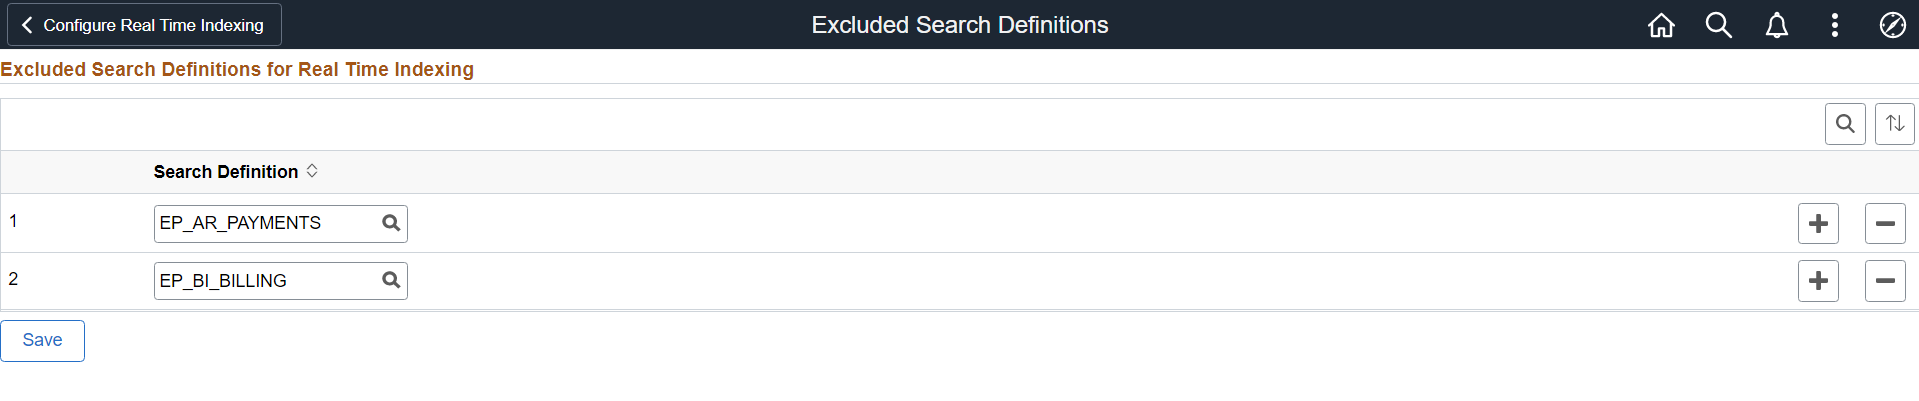 Excluded Search Definitions page